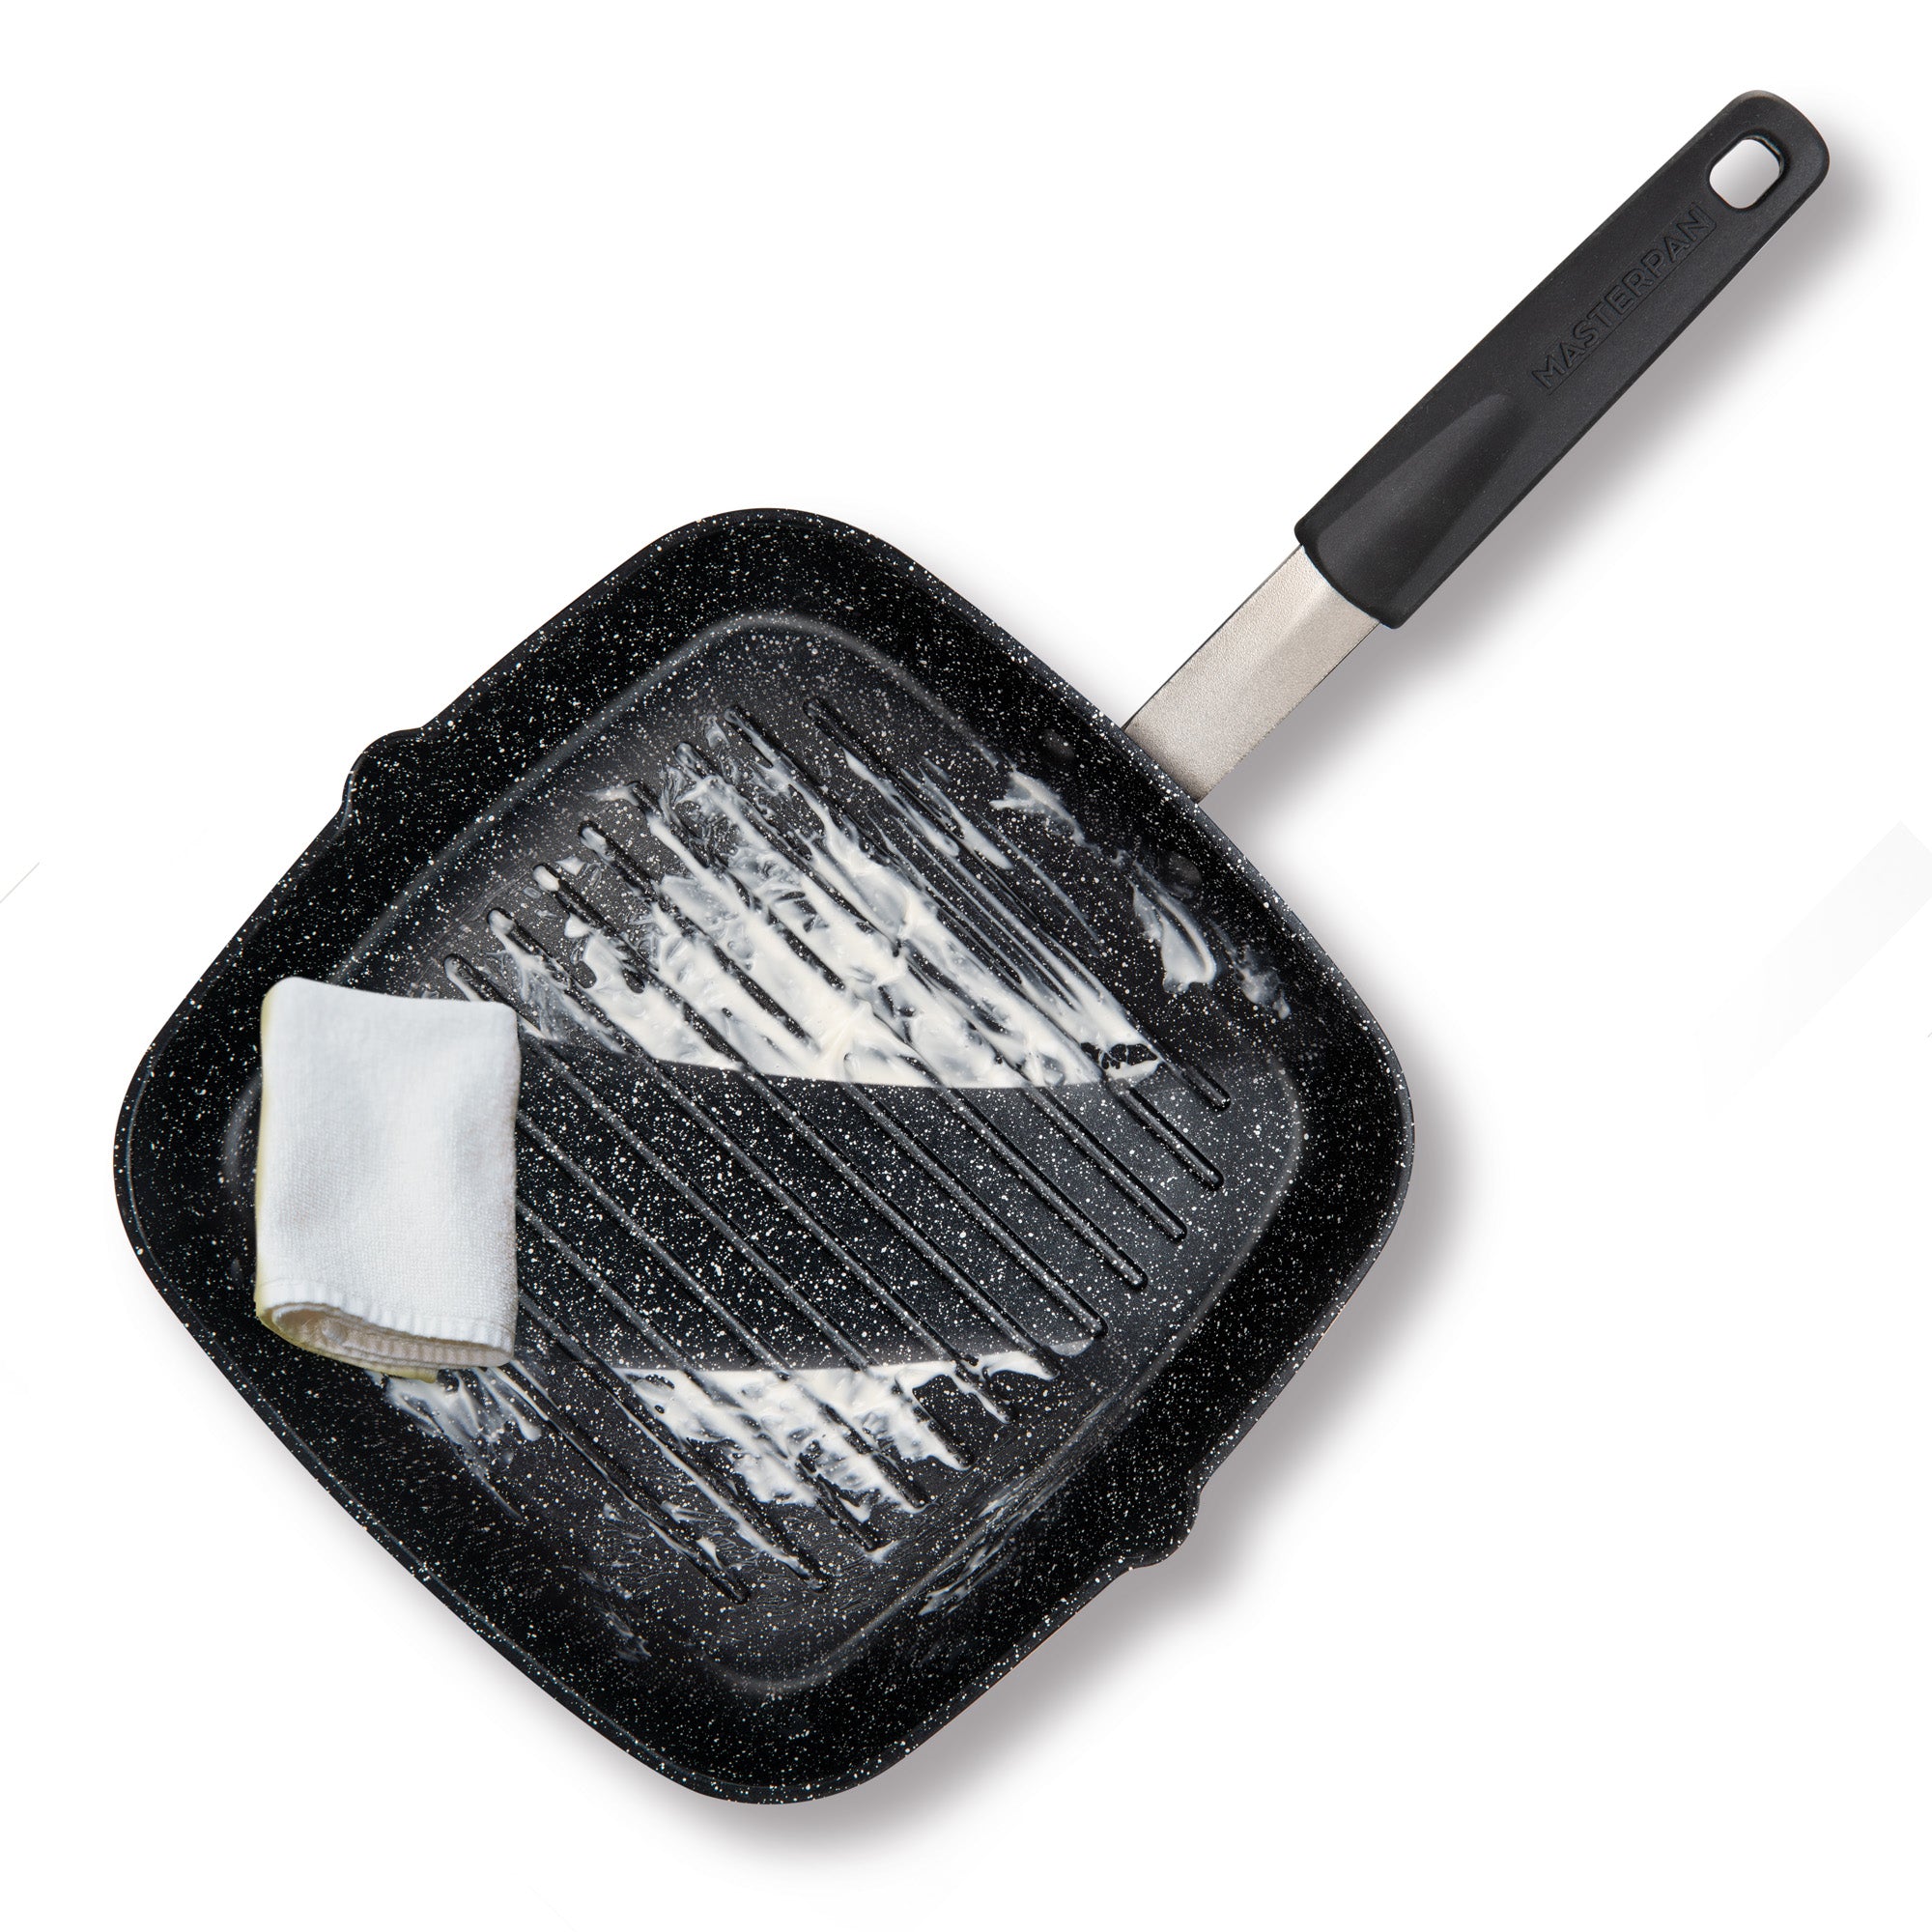 MASTERPAN Nonstick Grill Pan with Silicone Grip, 10